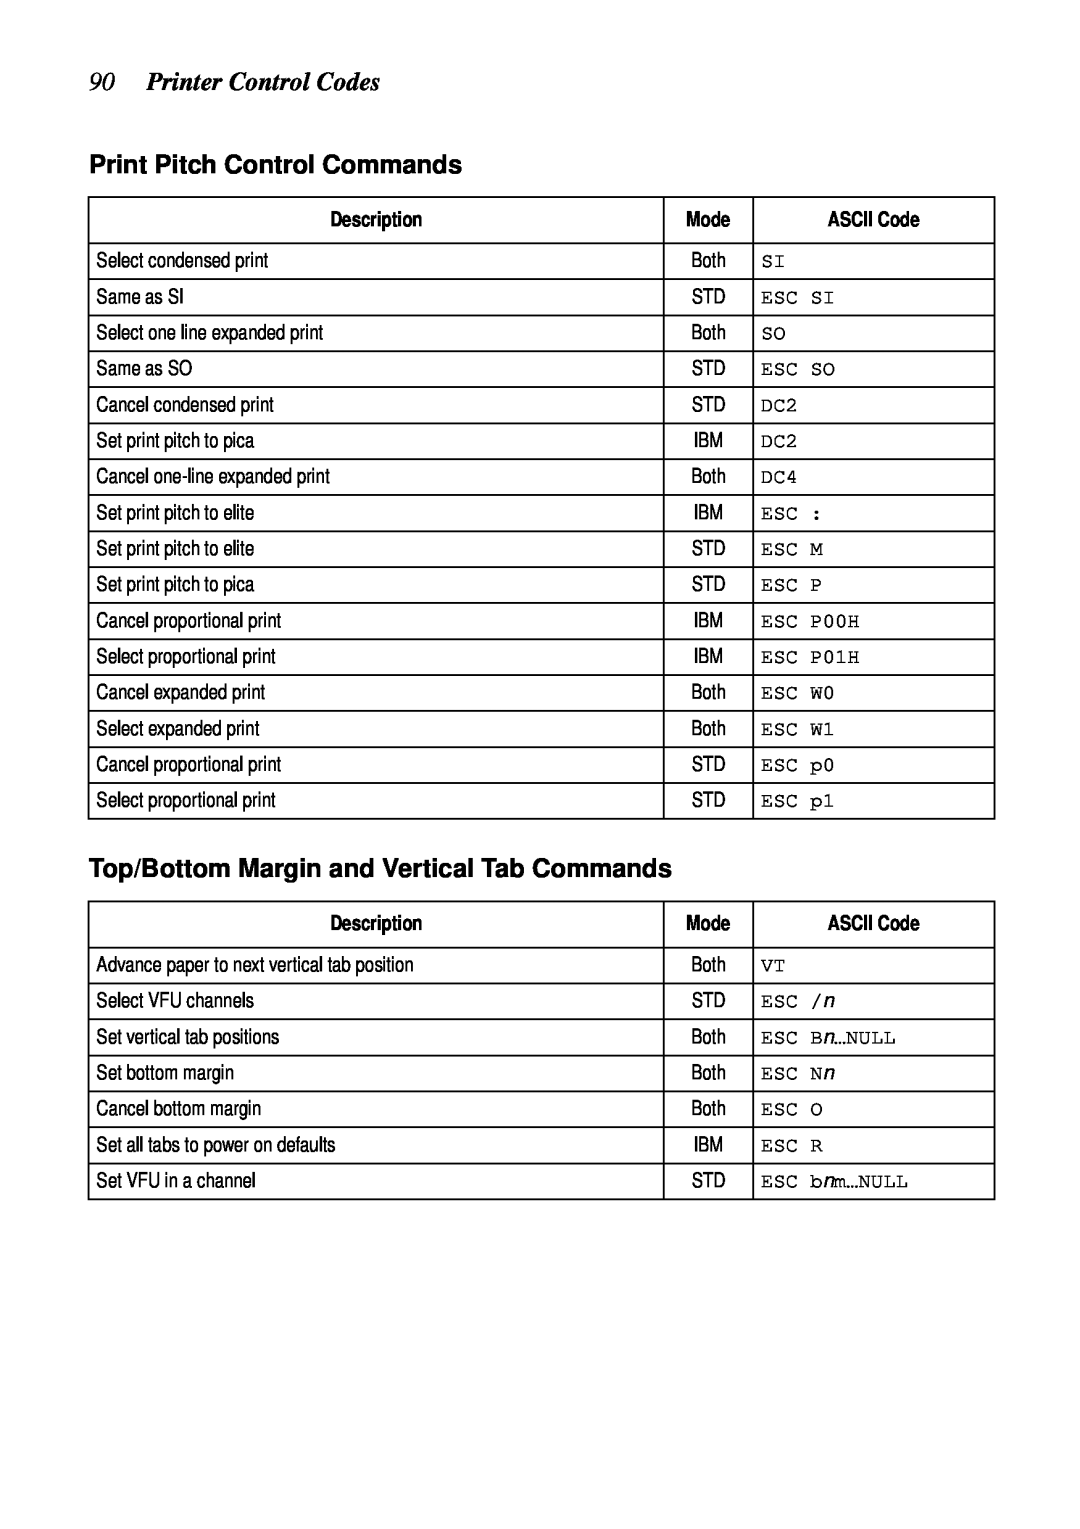 Star Micronics LC-7211 Printer Control Codes, Print Pitch Control Commands, Top/Bottom Margin and Vertical Tab Commands 